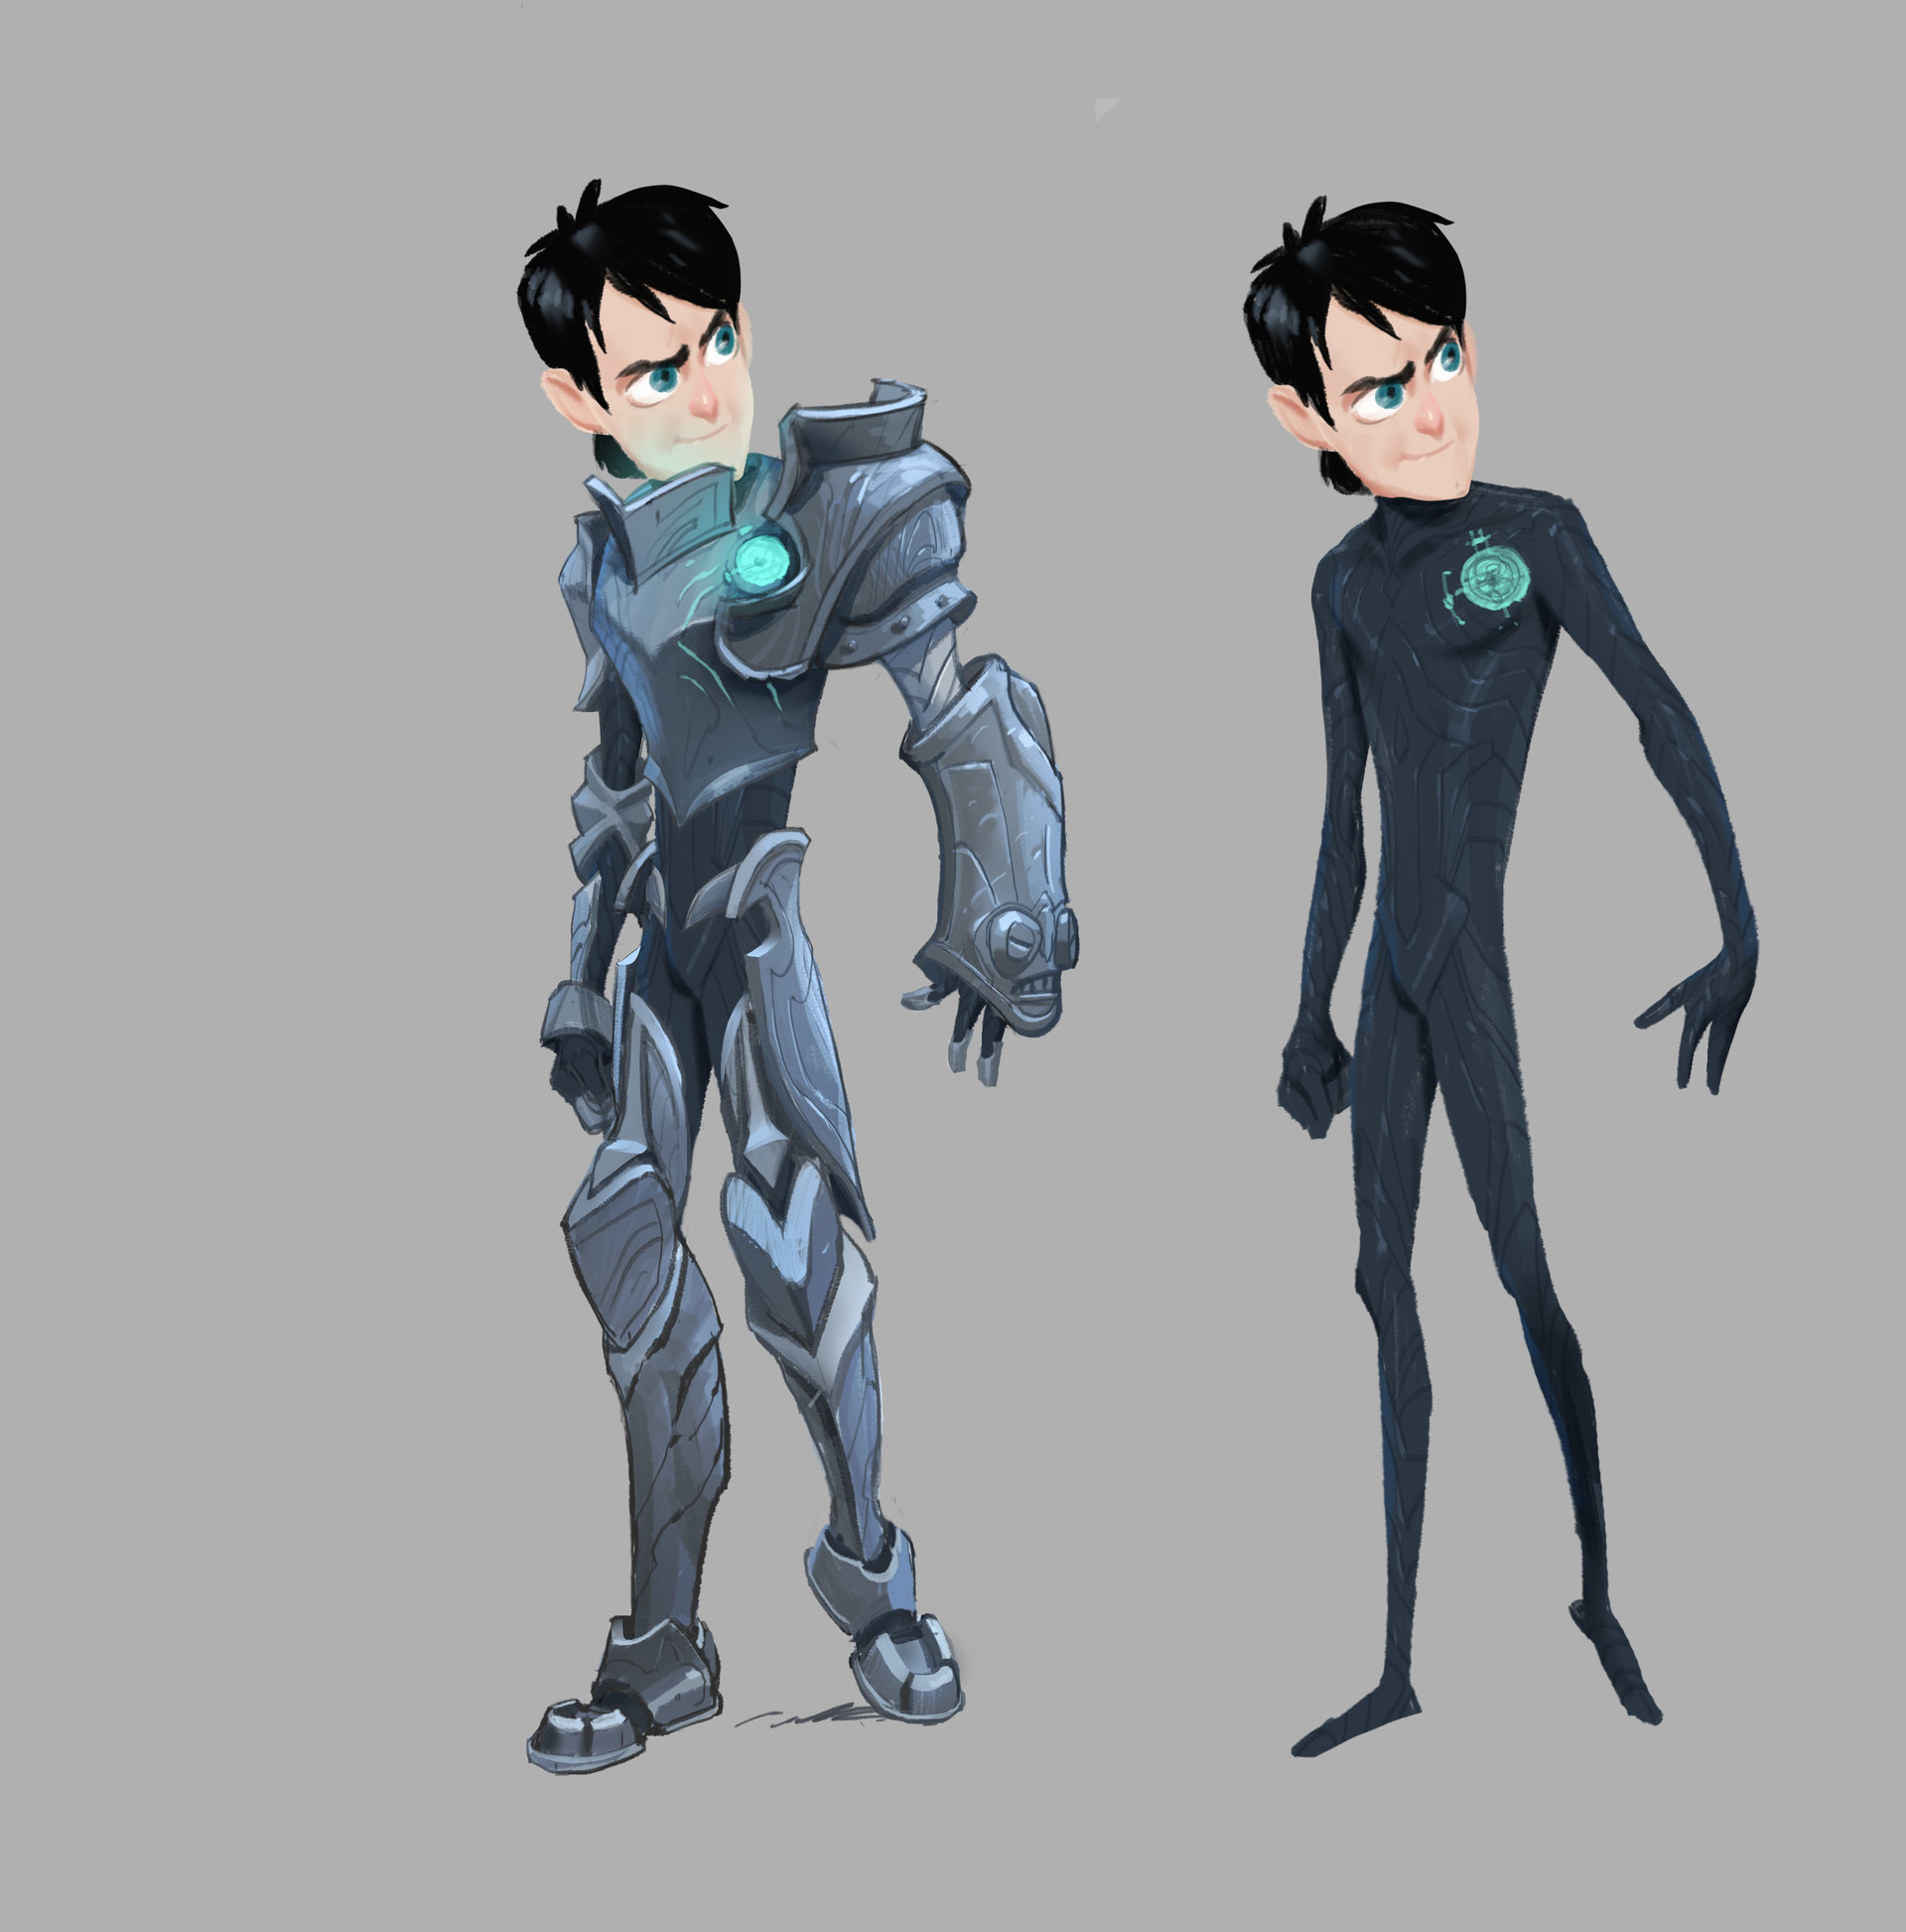 Concept art for Trollhunters.